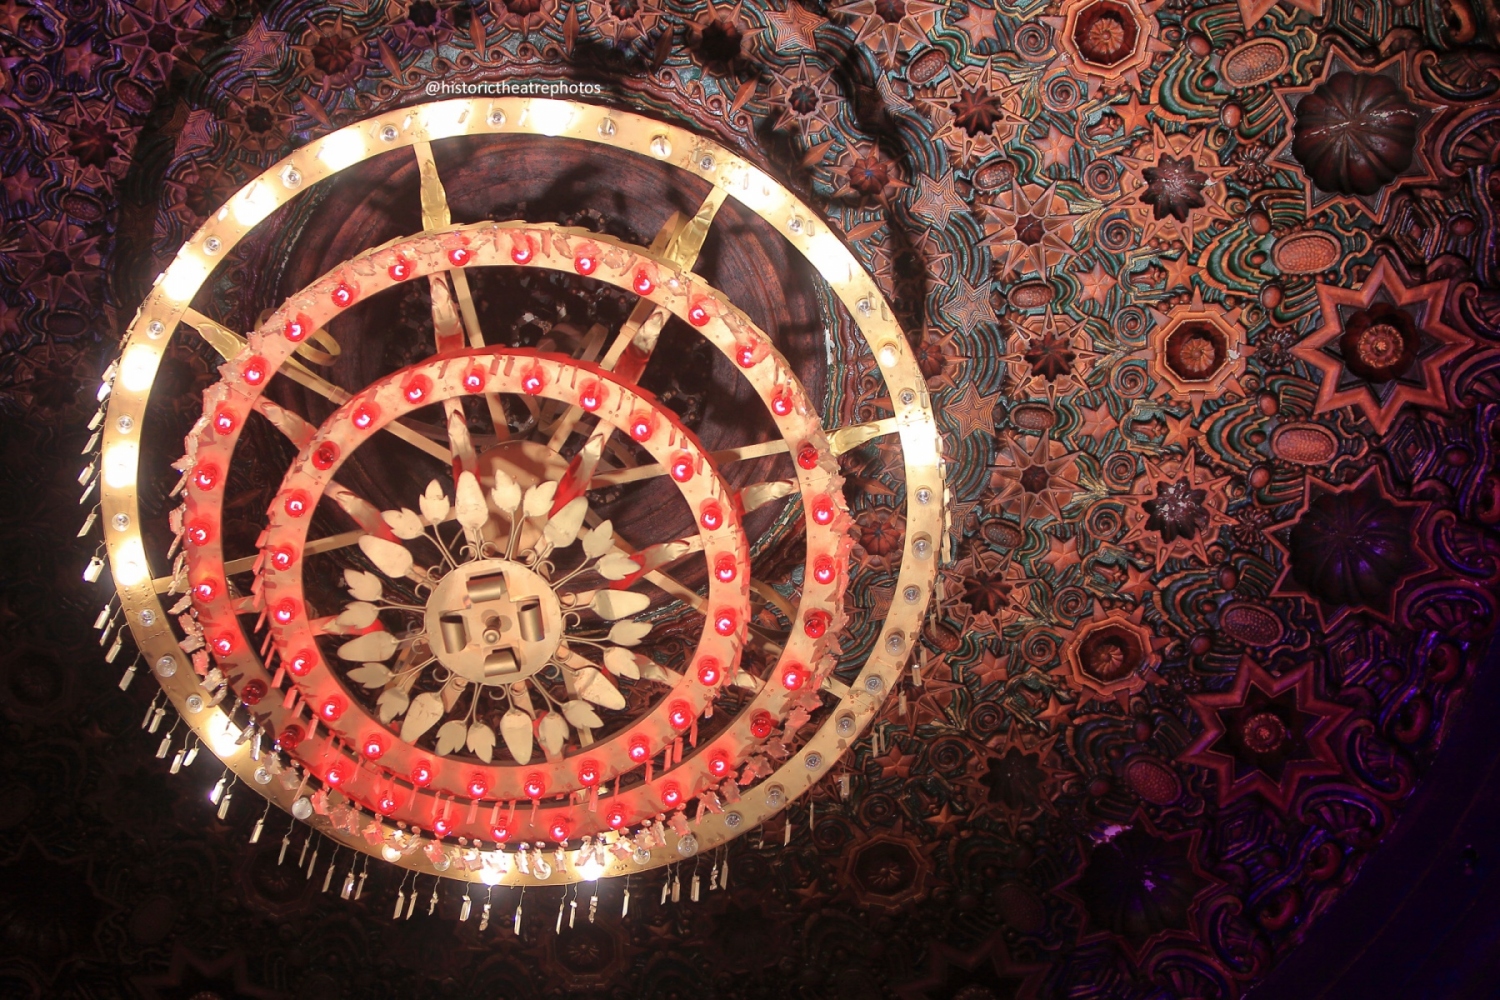 Million Dollar Theatre, Los Angeles: Chandelier and detail of Dome